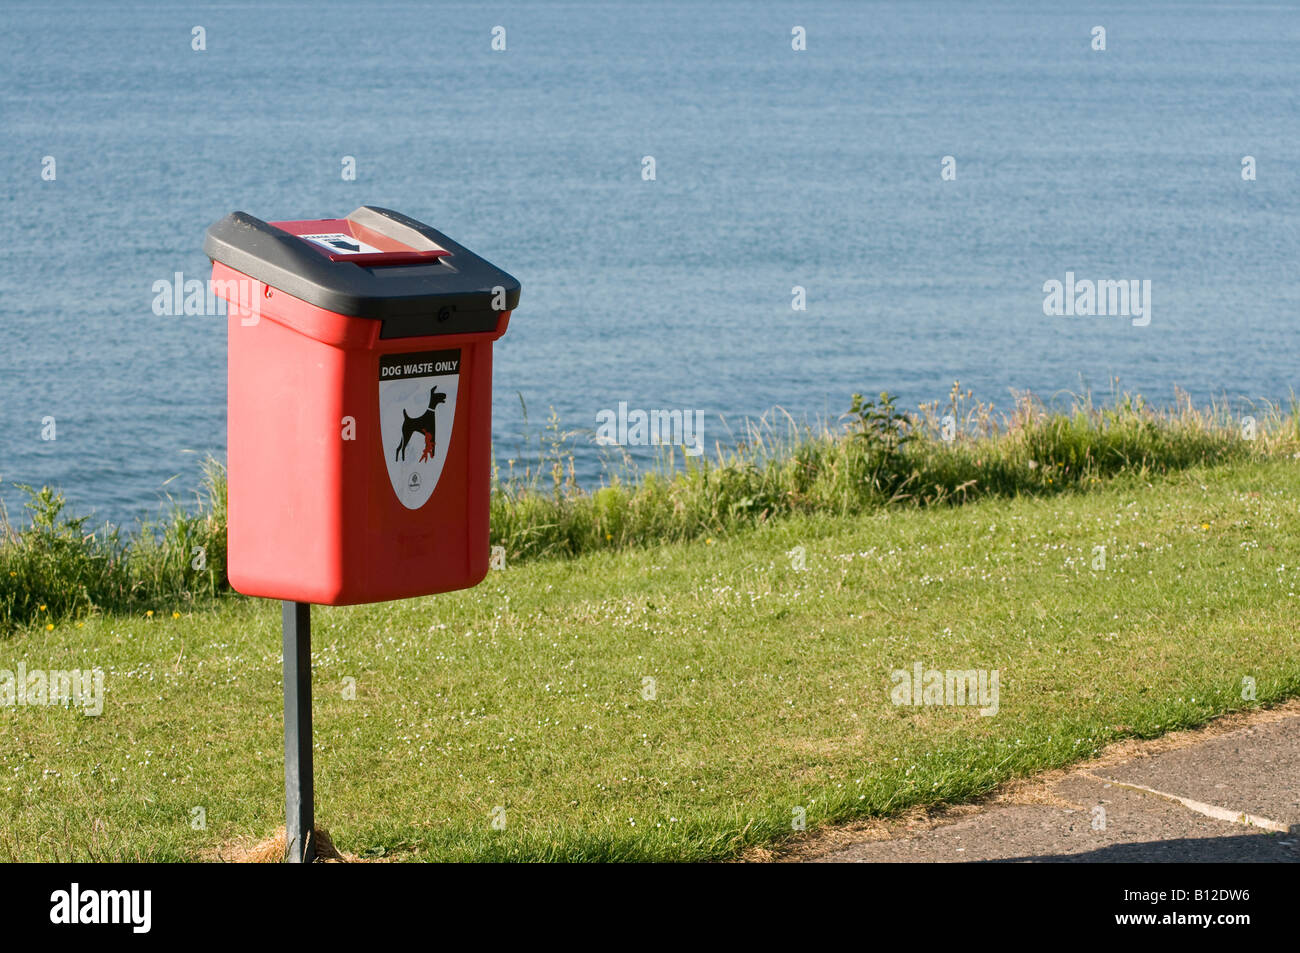 Dog waste bin in a park, by the sea Stock Photo